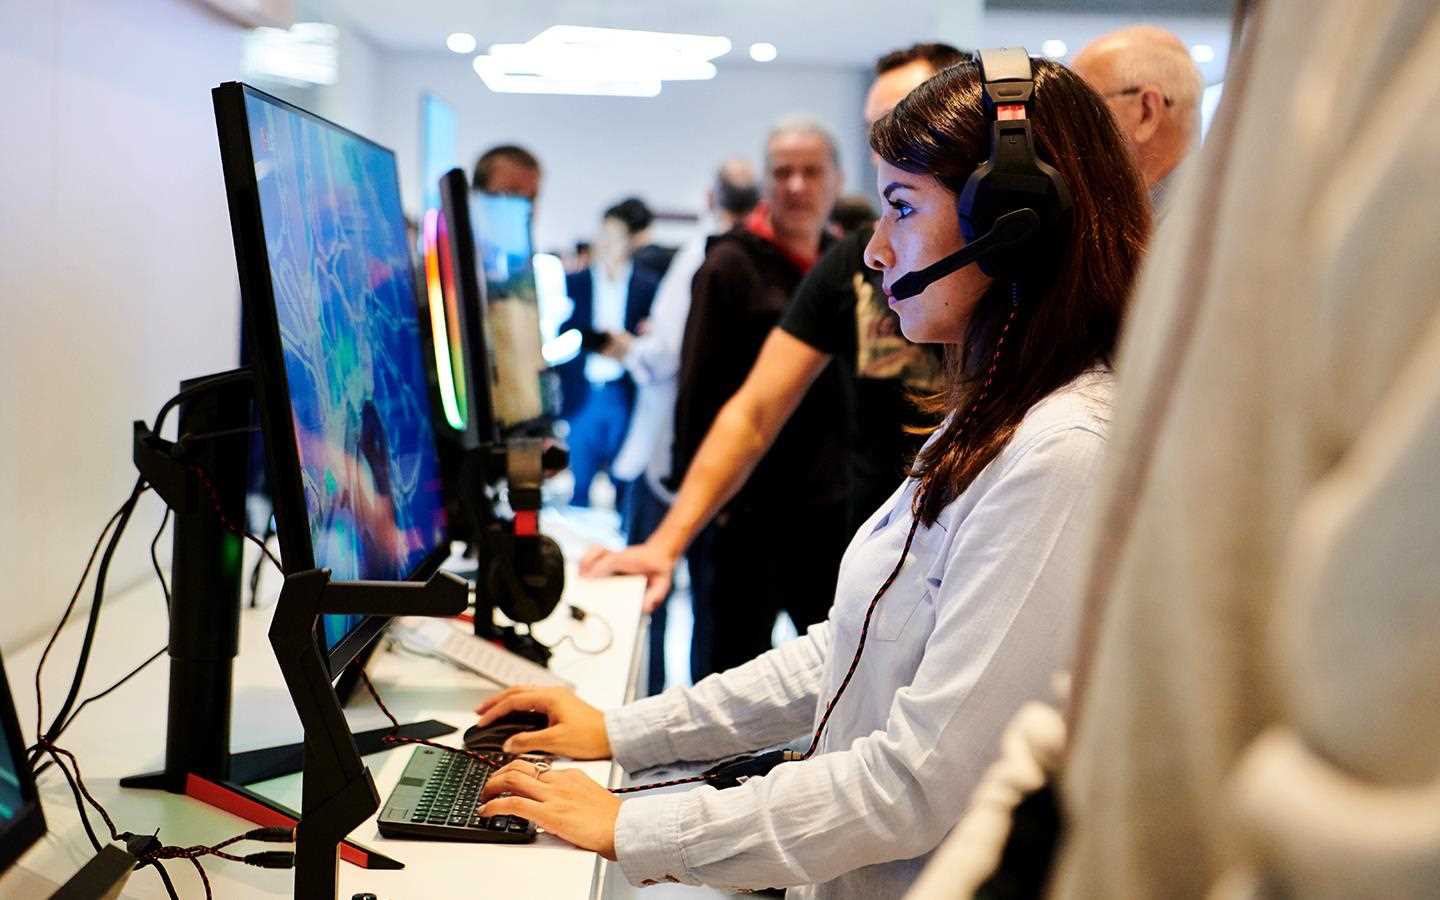 IFA 2018: A woman plays video games on an LG monitor, amongst the crowd at the exhibition 